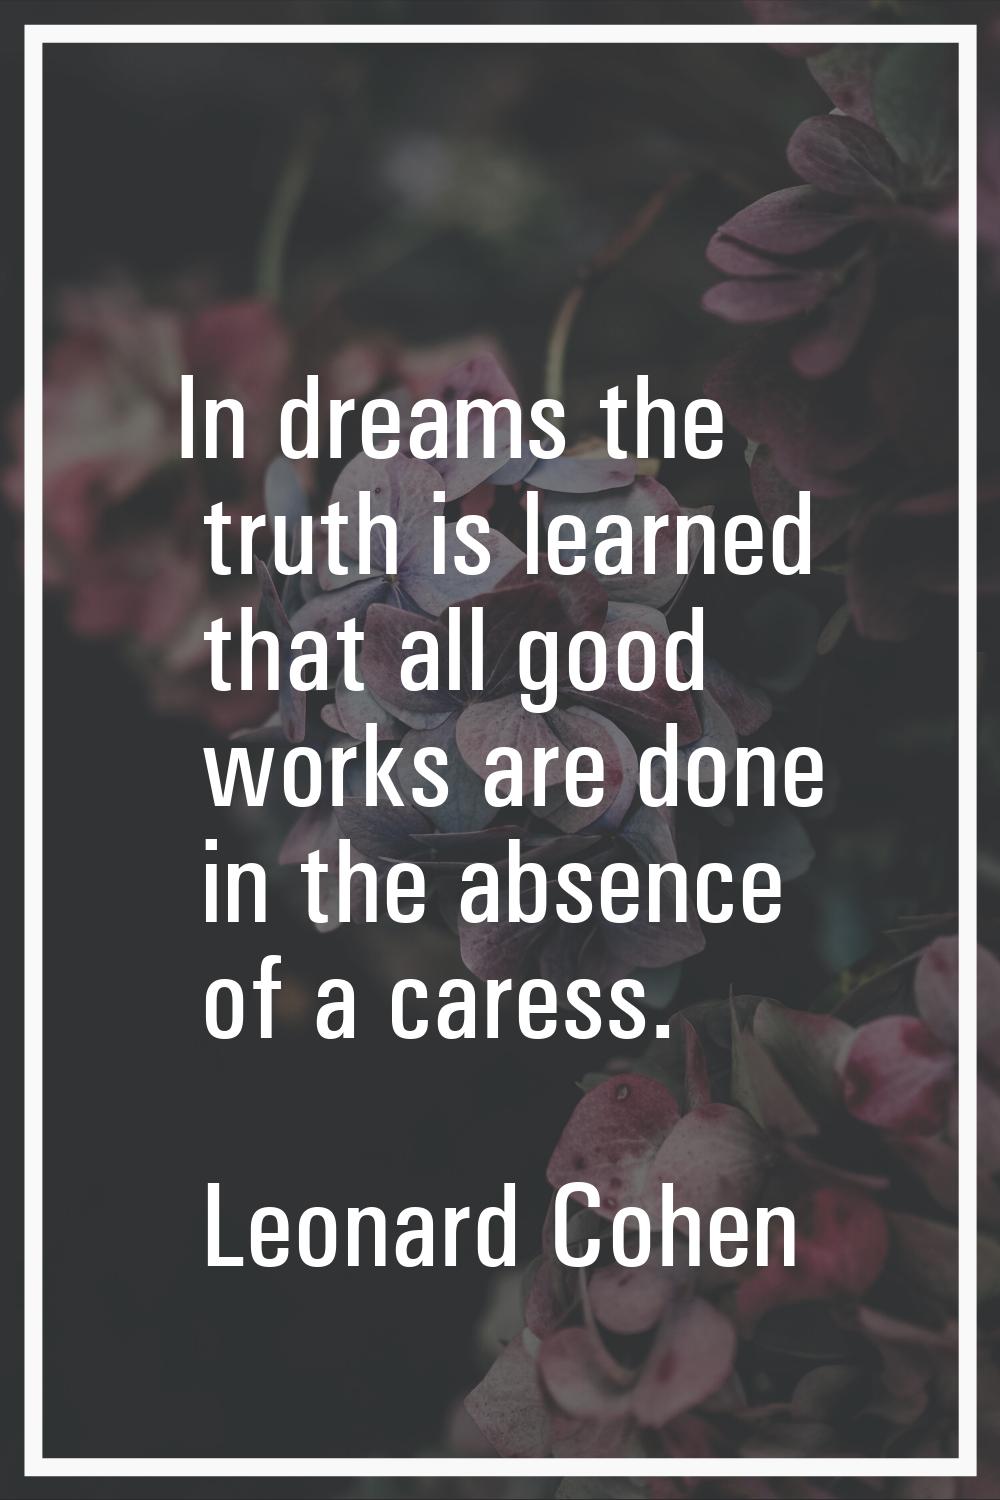 In dreams the truth is learned that all good works are done in the absence of a caress.